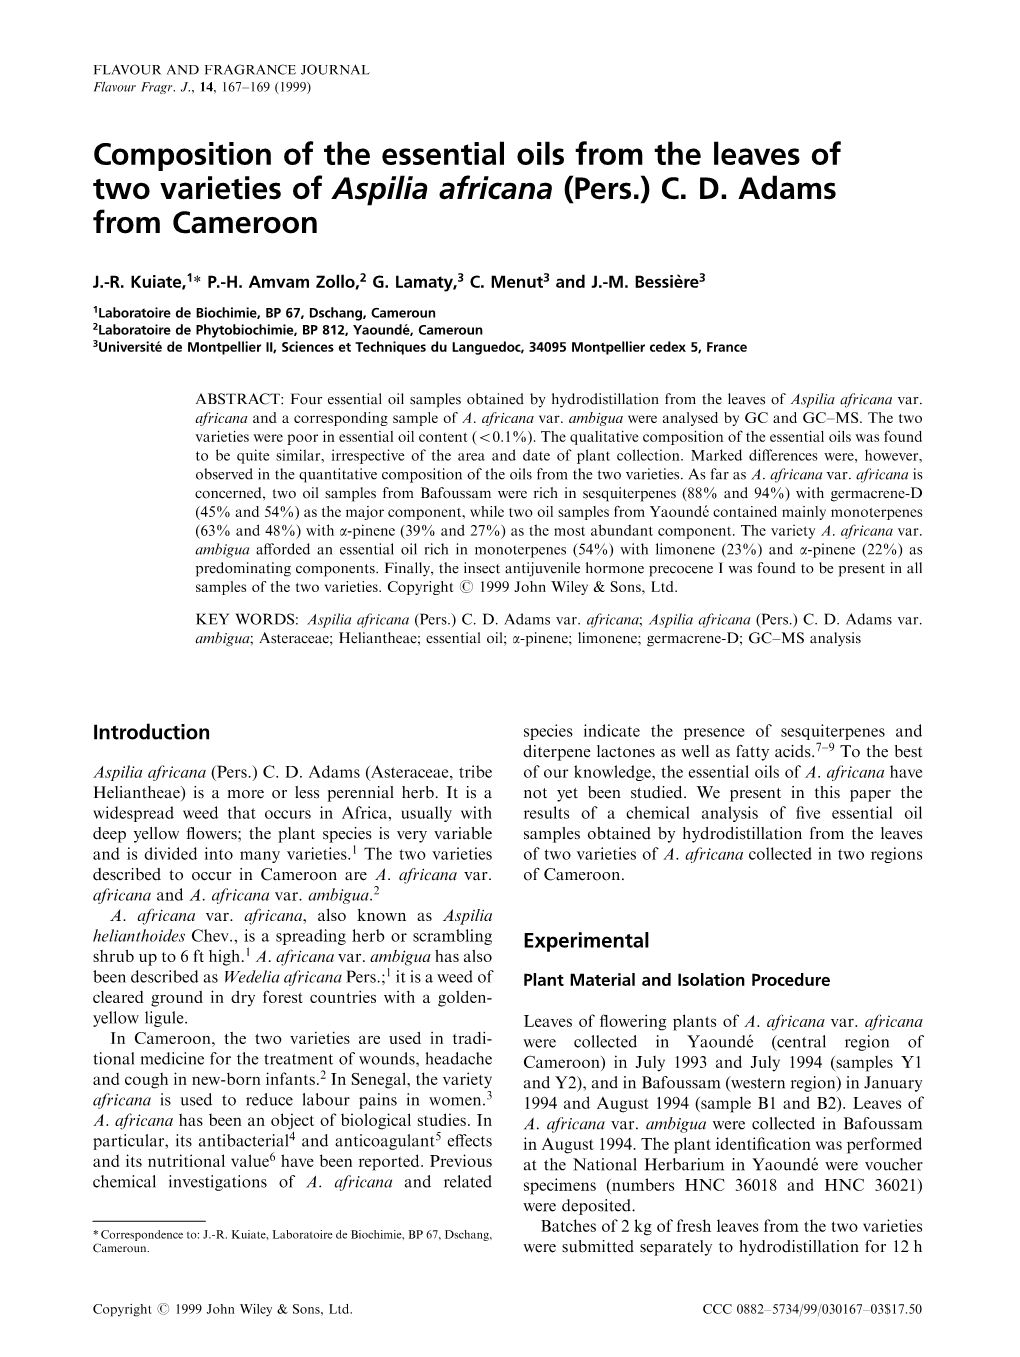 Composition of the Essential Oils from the Leaves of Two Varieties of Aspilia Africana (Pers.) C